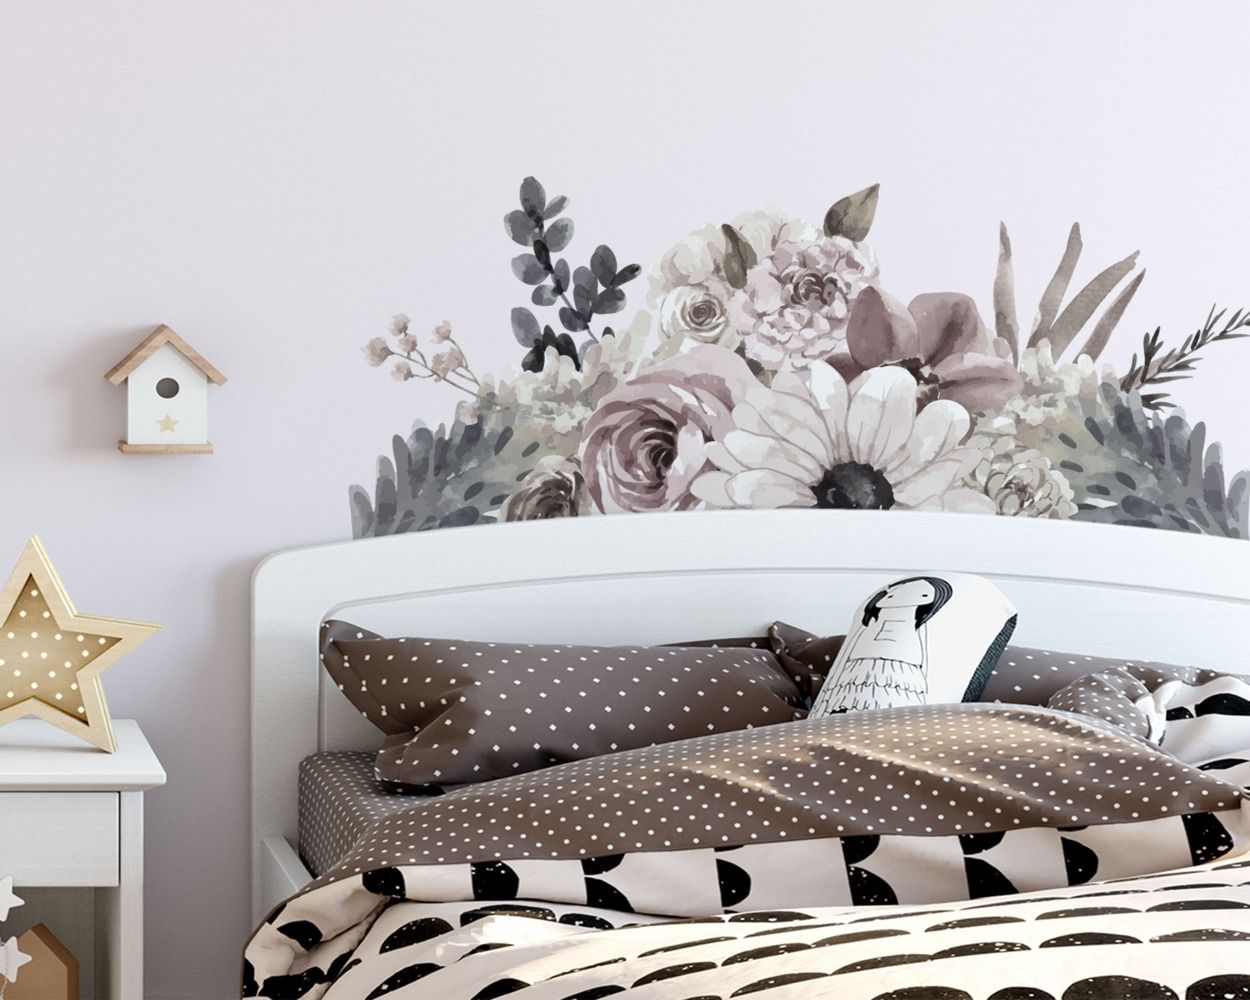 Pancy Floral Headboard Wall Decals for bedroom wall decor